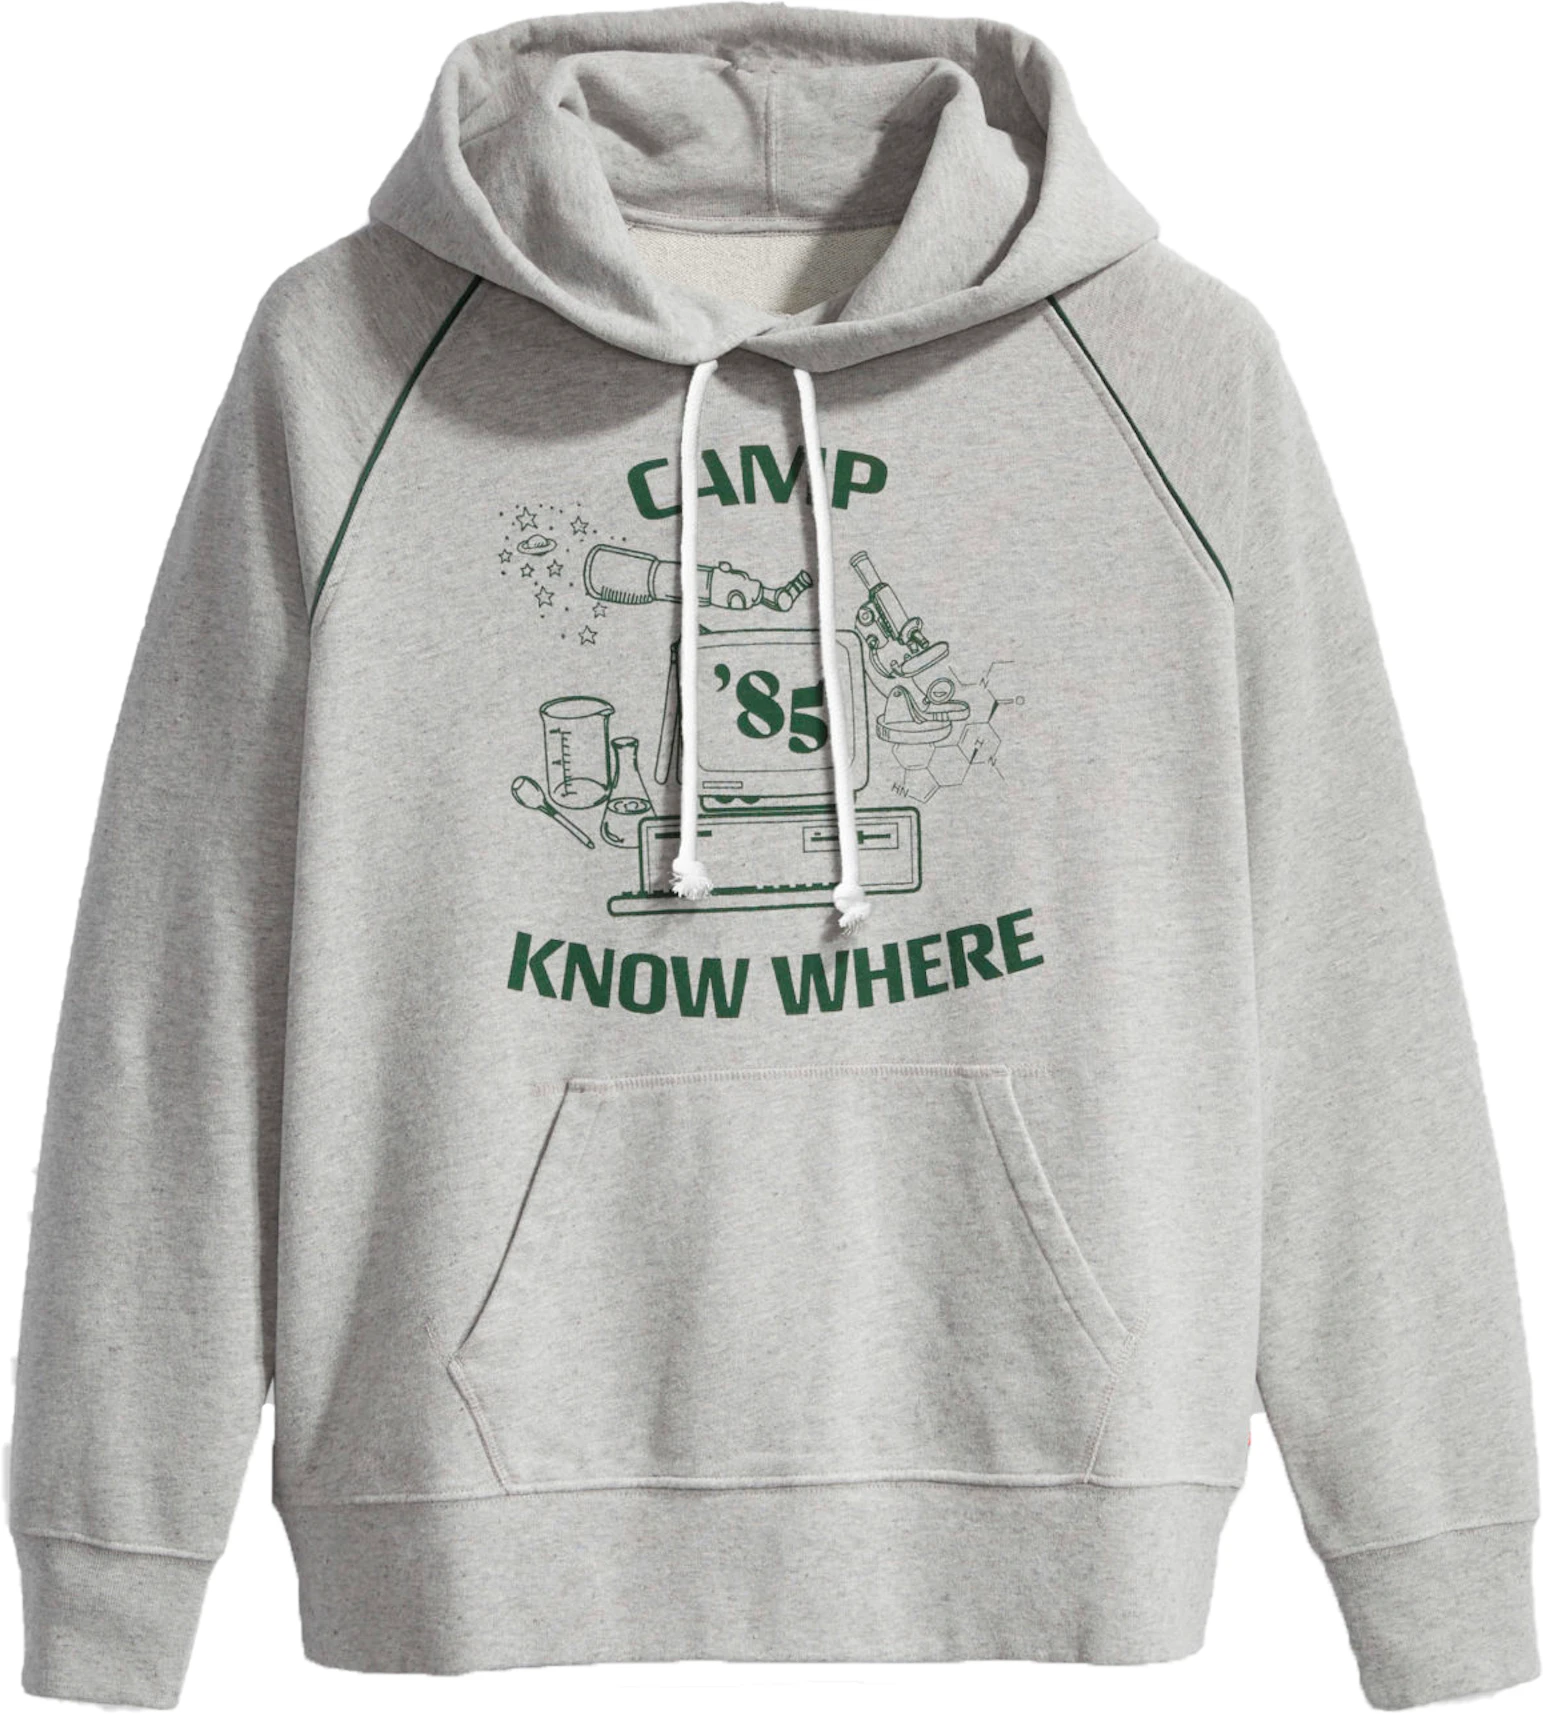 Levis x Stranger Things Camp Know Where Hoodie Grey - SS19 - US